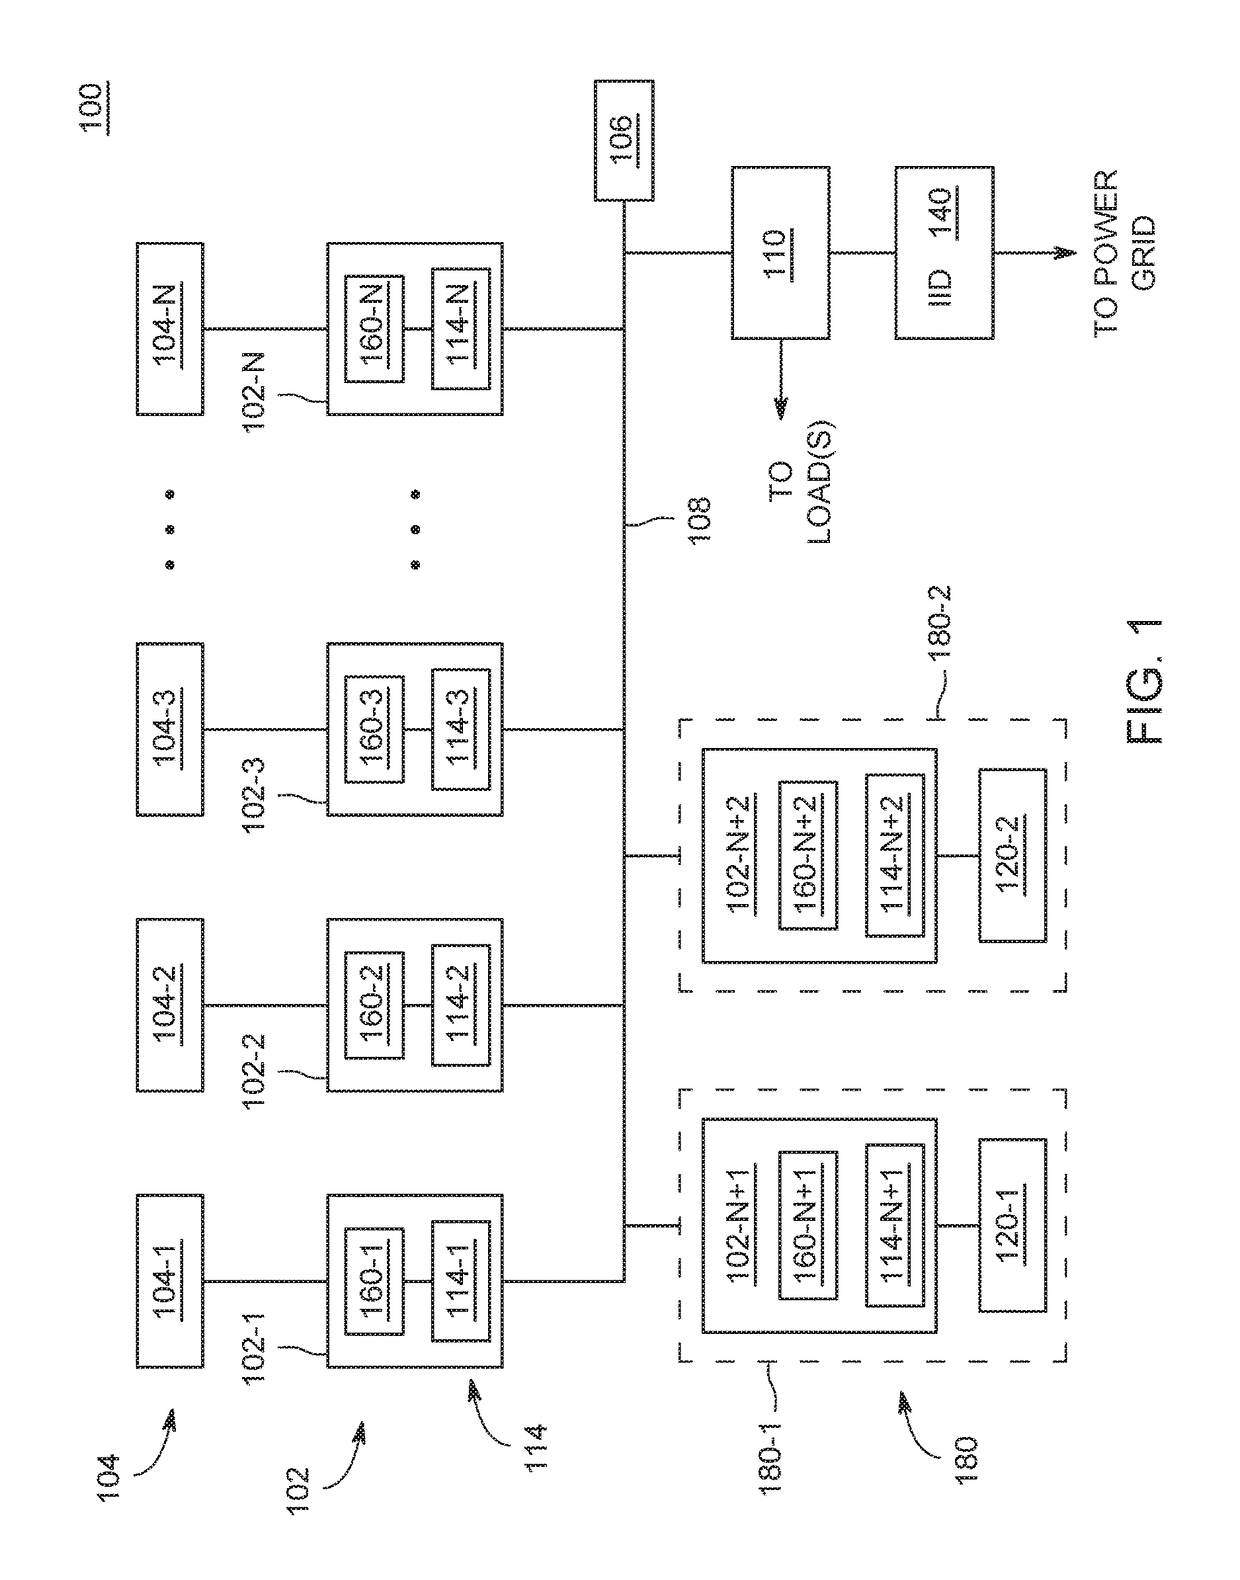 Method and apparatus for increased energy harvest in a microgrid